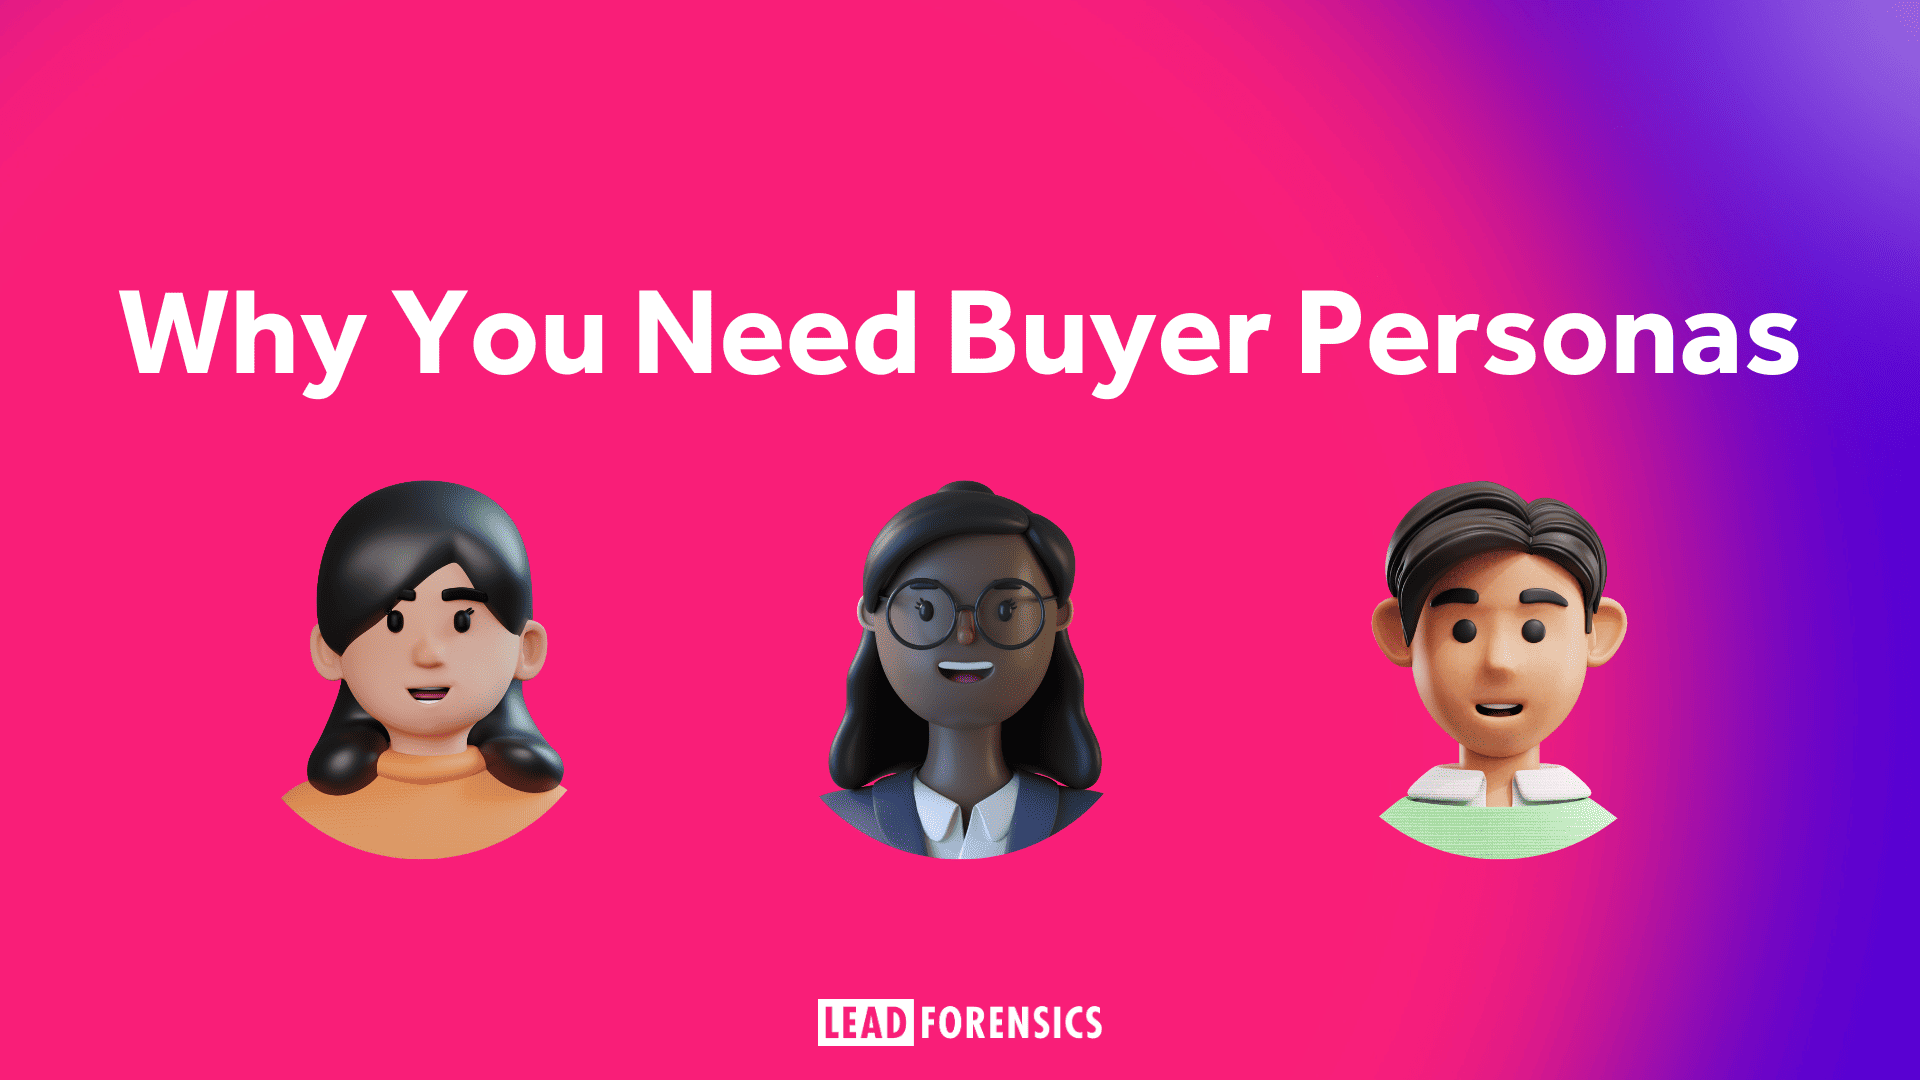 Why You Need Buyer Personas For Your B2B Sales & Marketing Activities